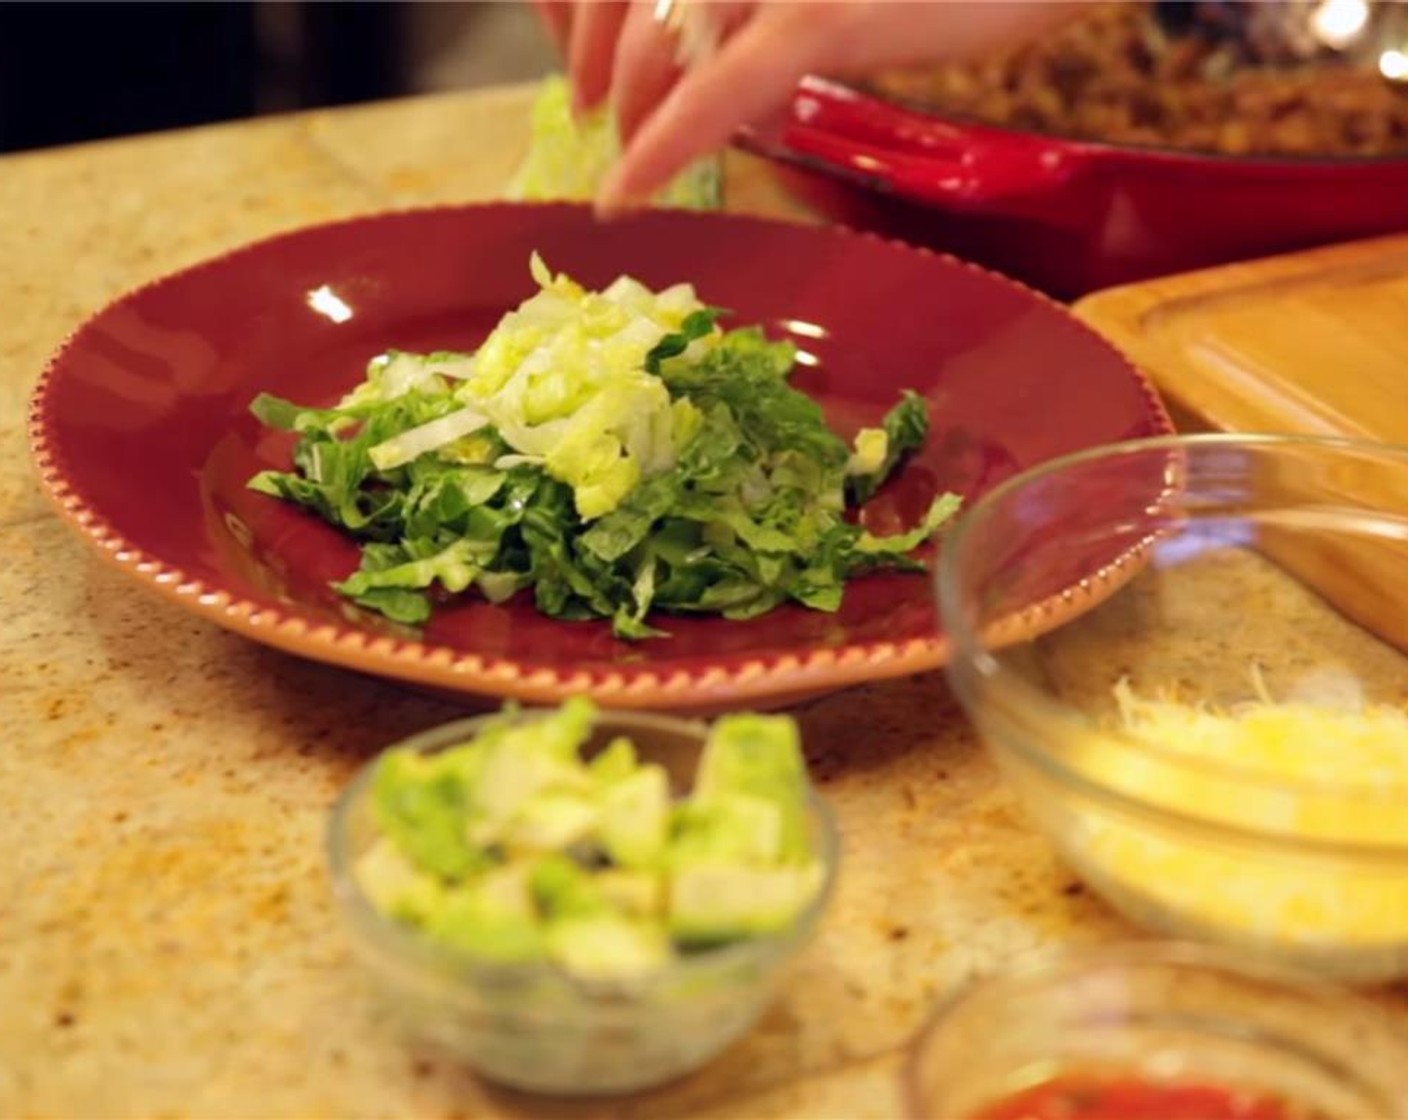 step 5 Assemble 4 dinner plates with a mound of romaine lettuce in the center of each plate.